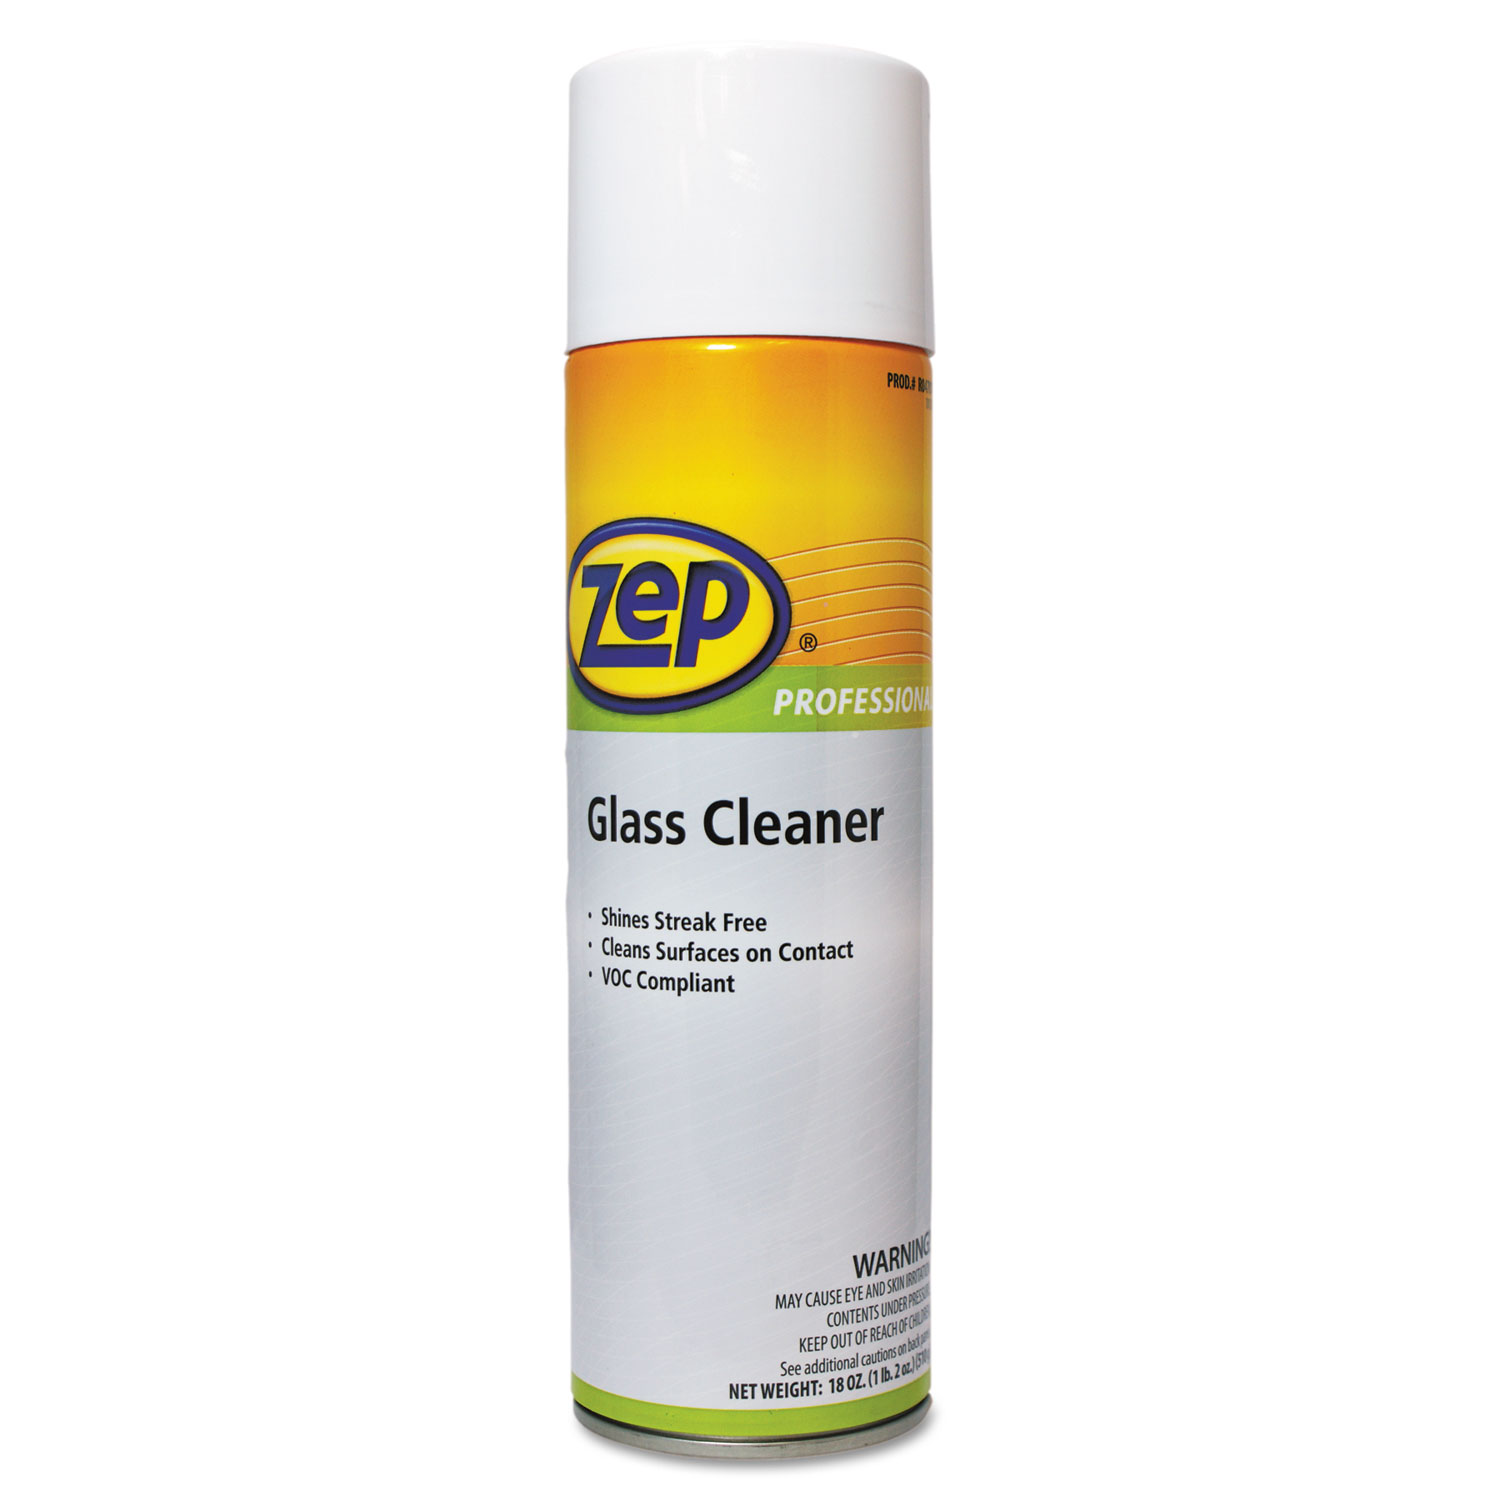  Zep Professional 1042188 Glass Cleaner, 18 oz Can, 12/Carton (ZPP1042188) 